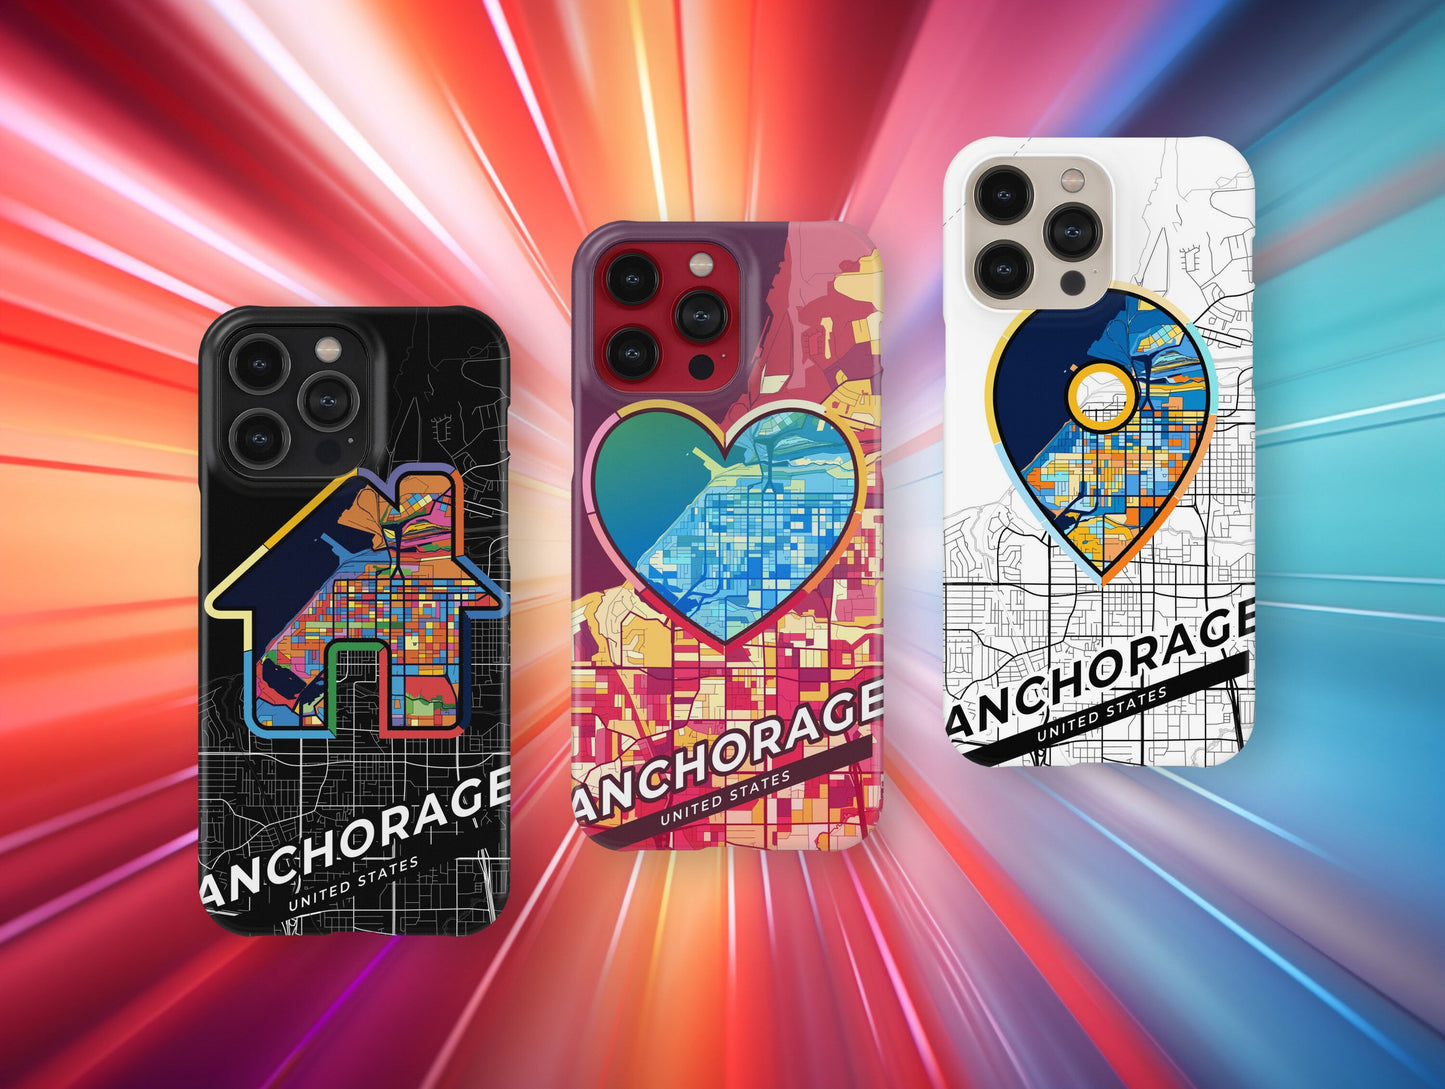 Anchorage Alaska slim phone case with colorful icon. Birthday, wedding or housewarming gift. Couple match cases.